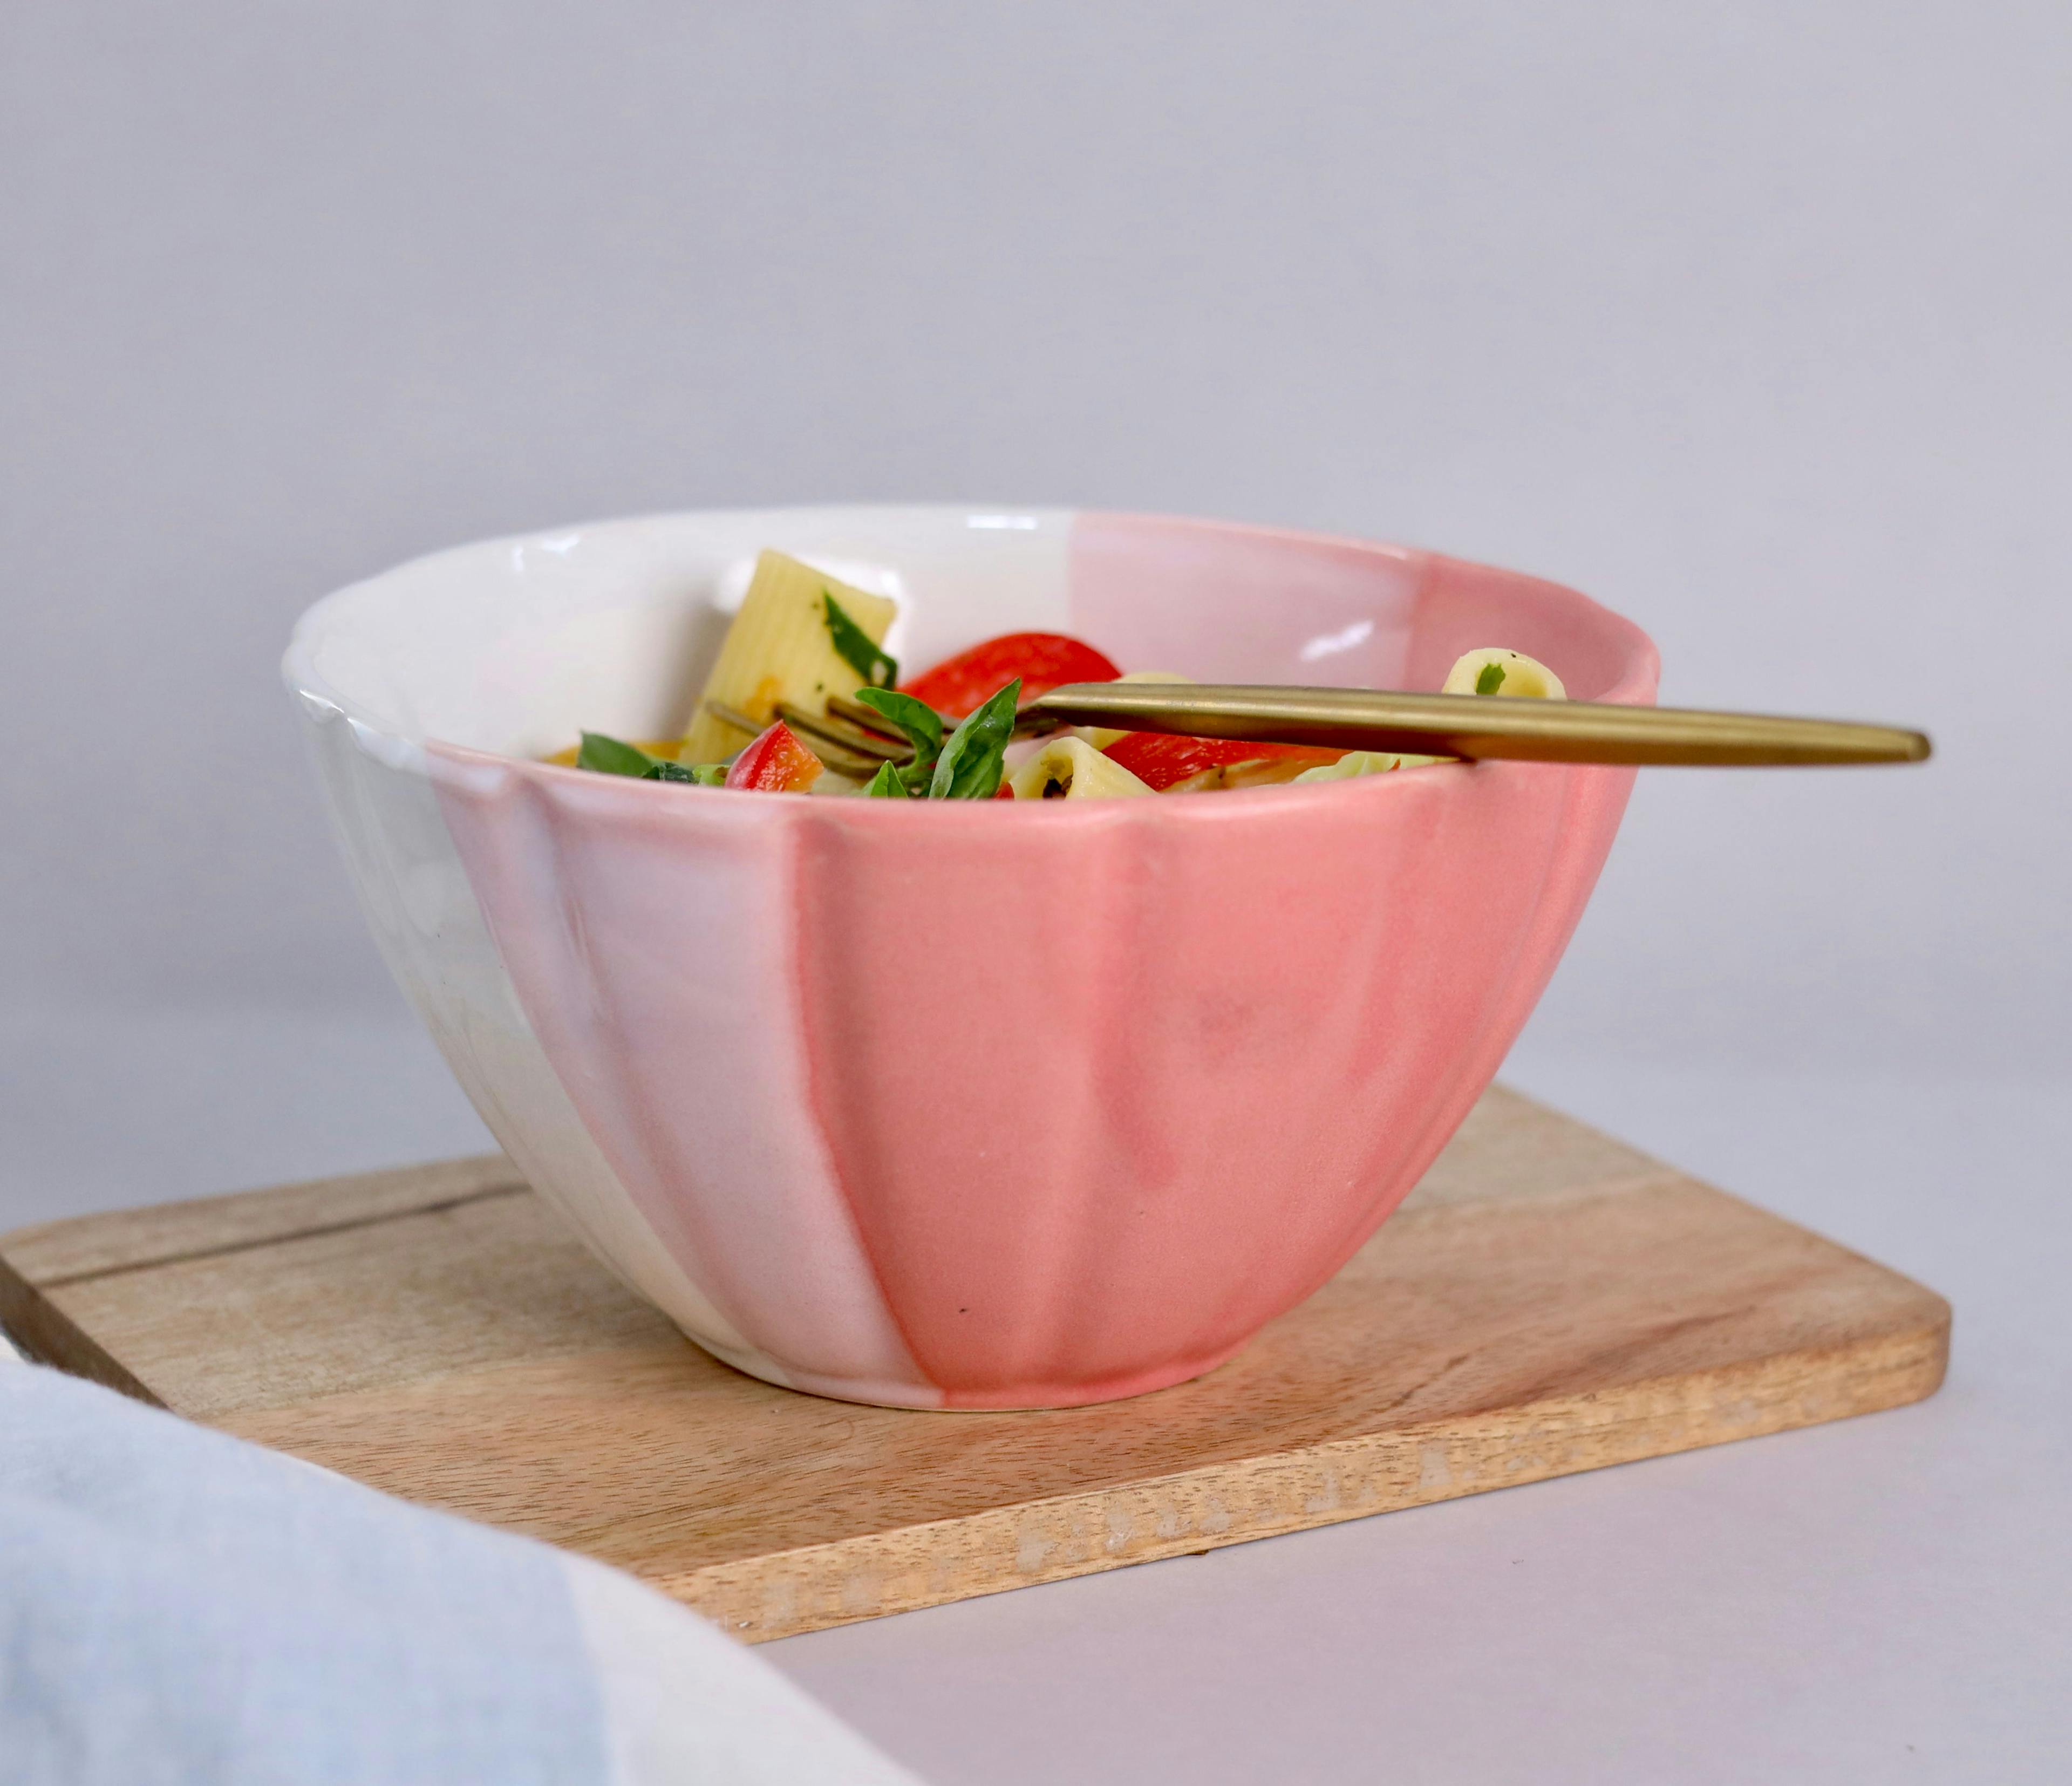 Ambrosia Fluted Serving Bowl, a product by Olive Home accent